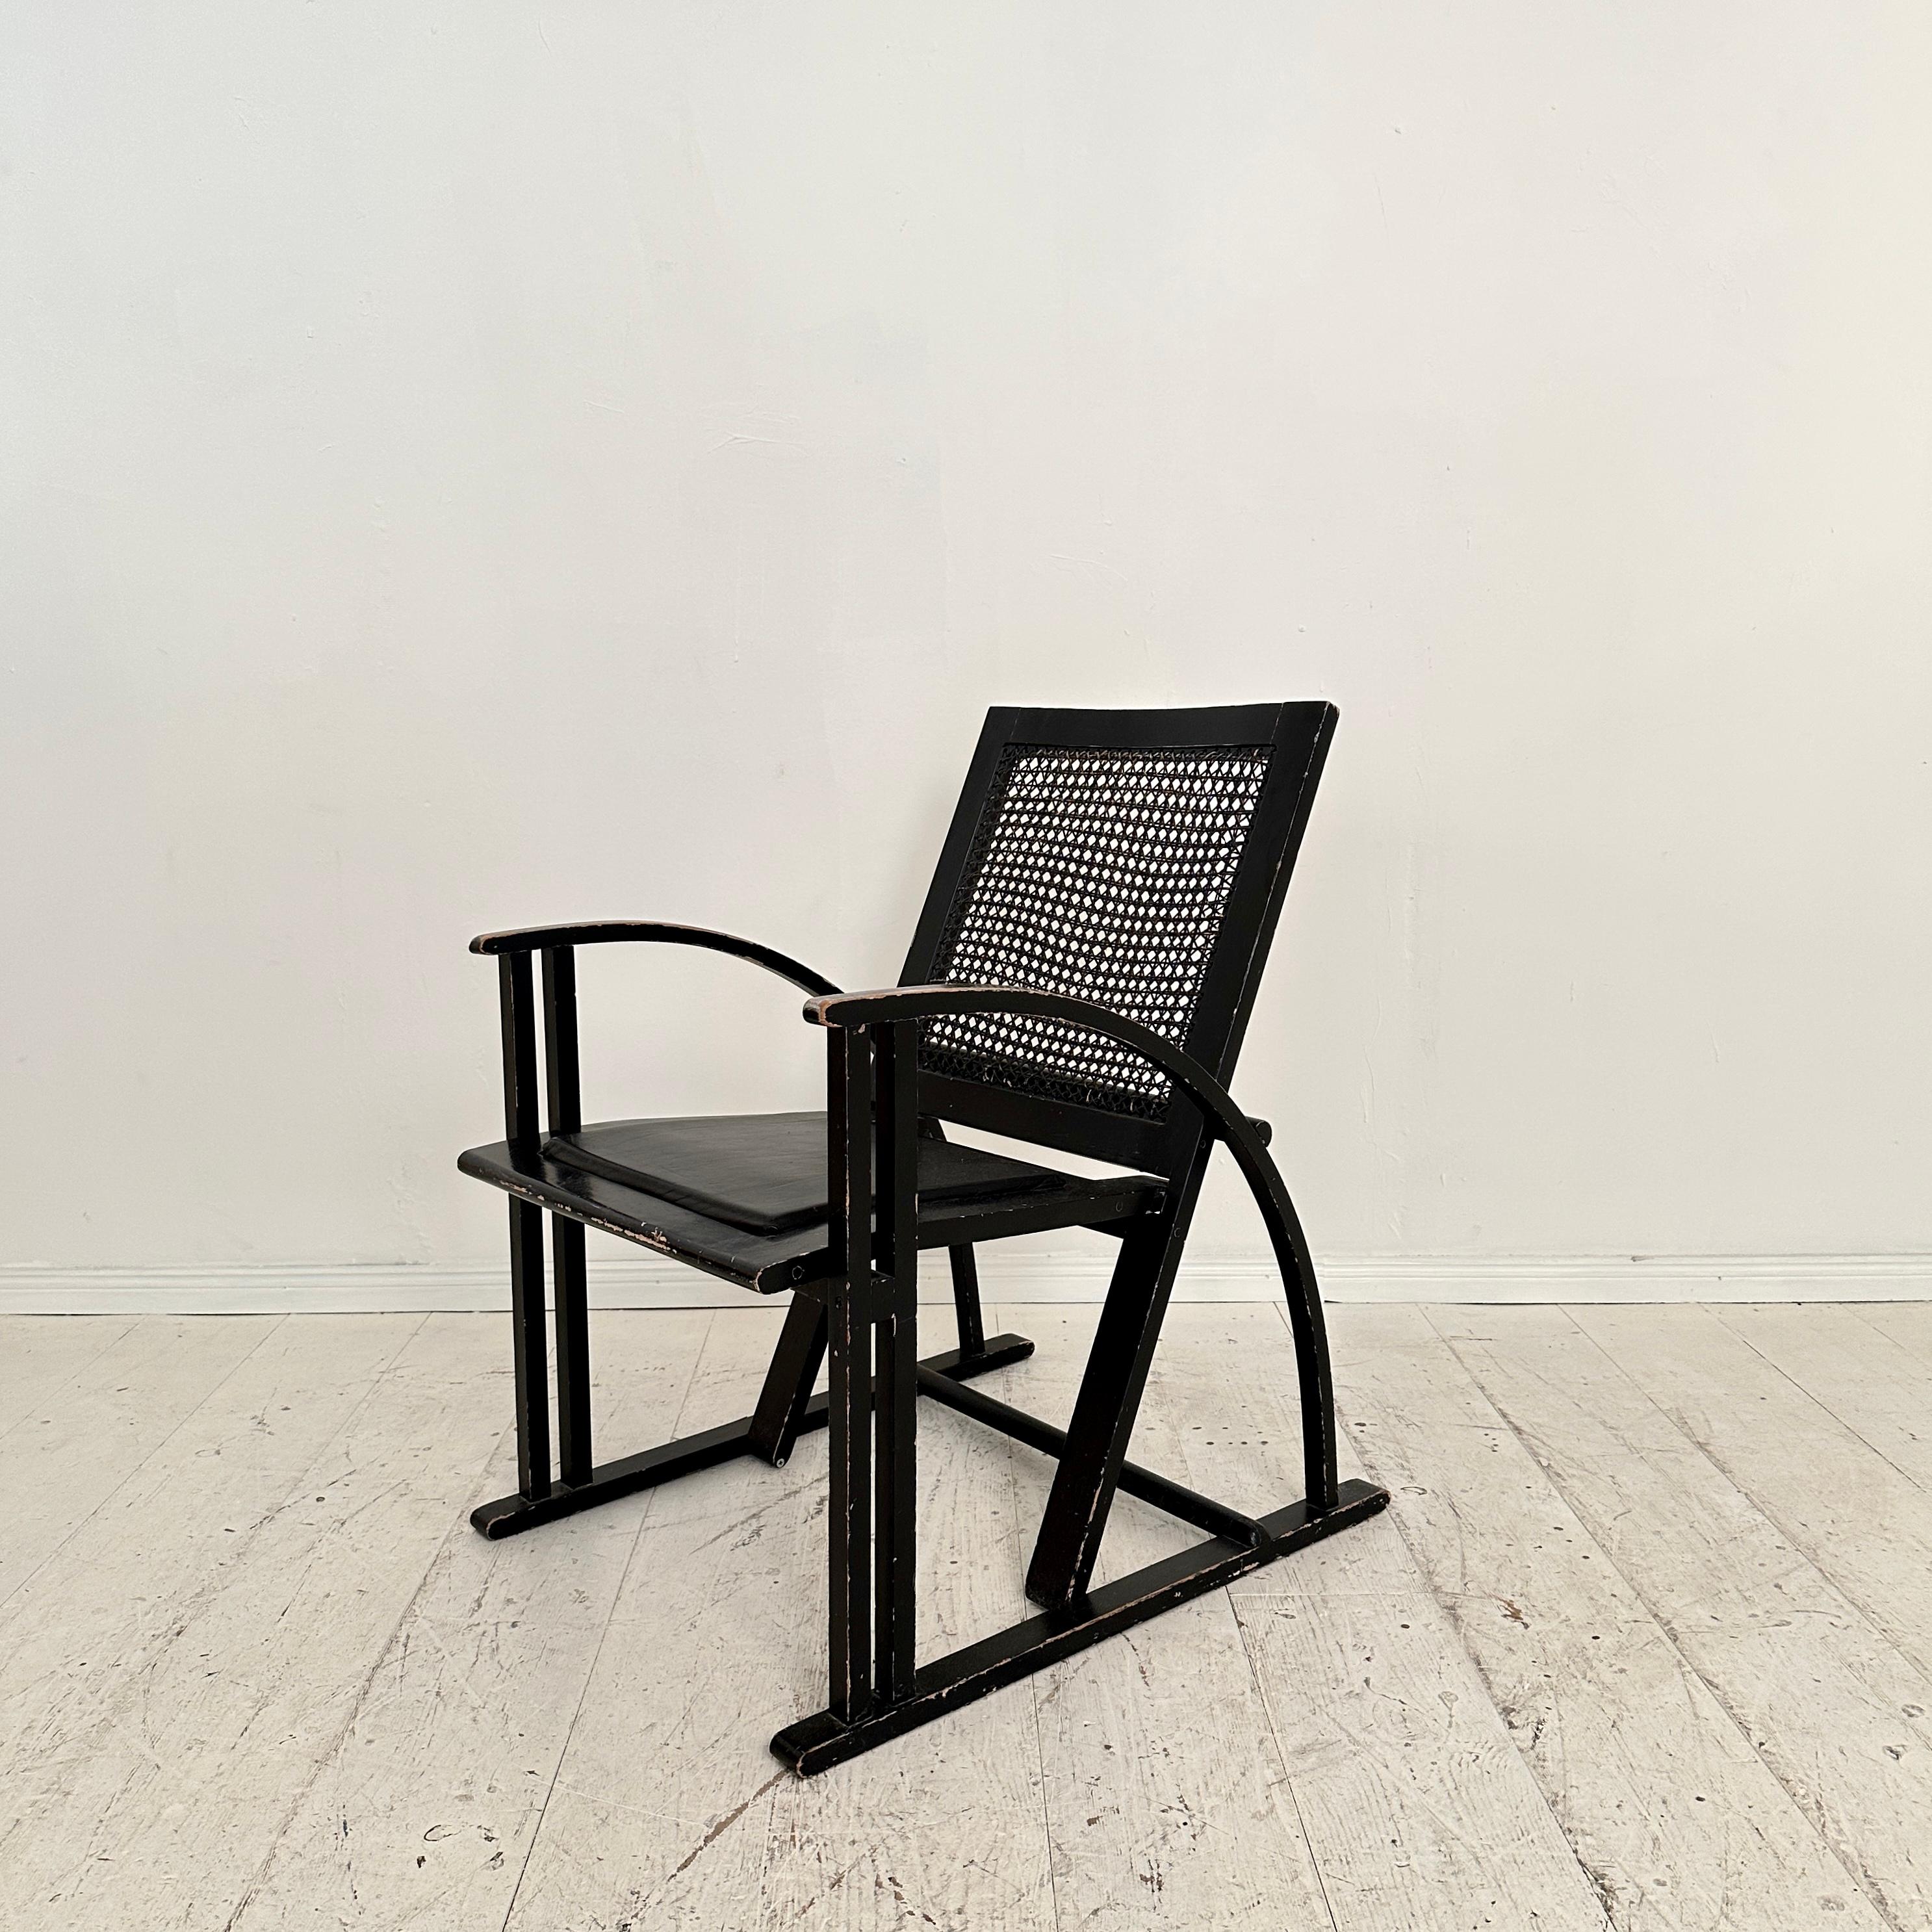 Fantastic Black Armchair by Pascal Mourgue for Pamco Triconfort, around 1980. The chairs is made out of black lacquered beech wood. The seat is upholstered in black leather and the back is caned.
A unique piece which is a great eye-catcher for your